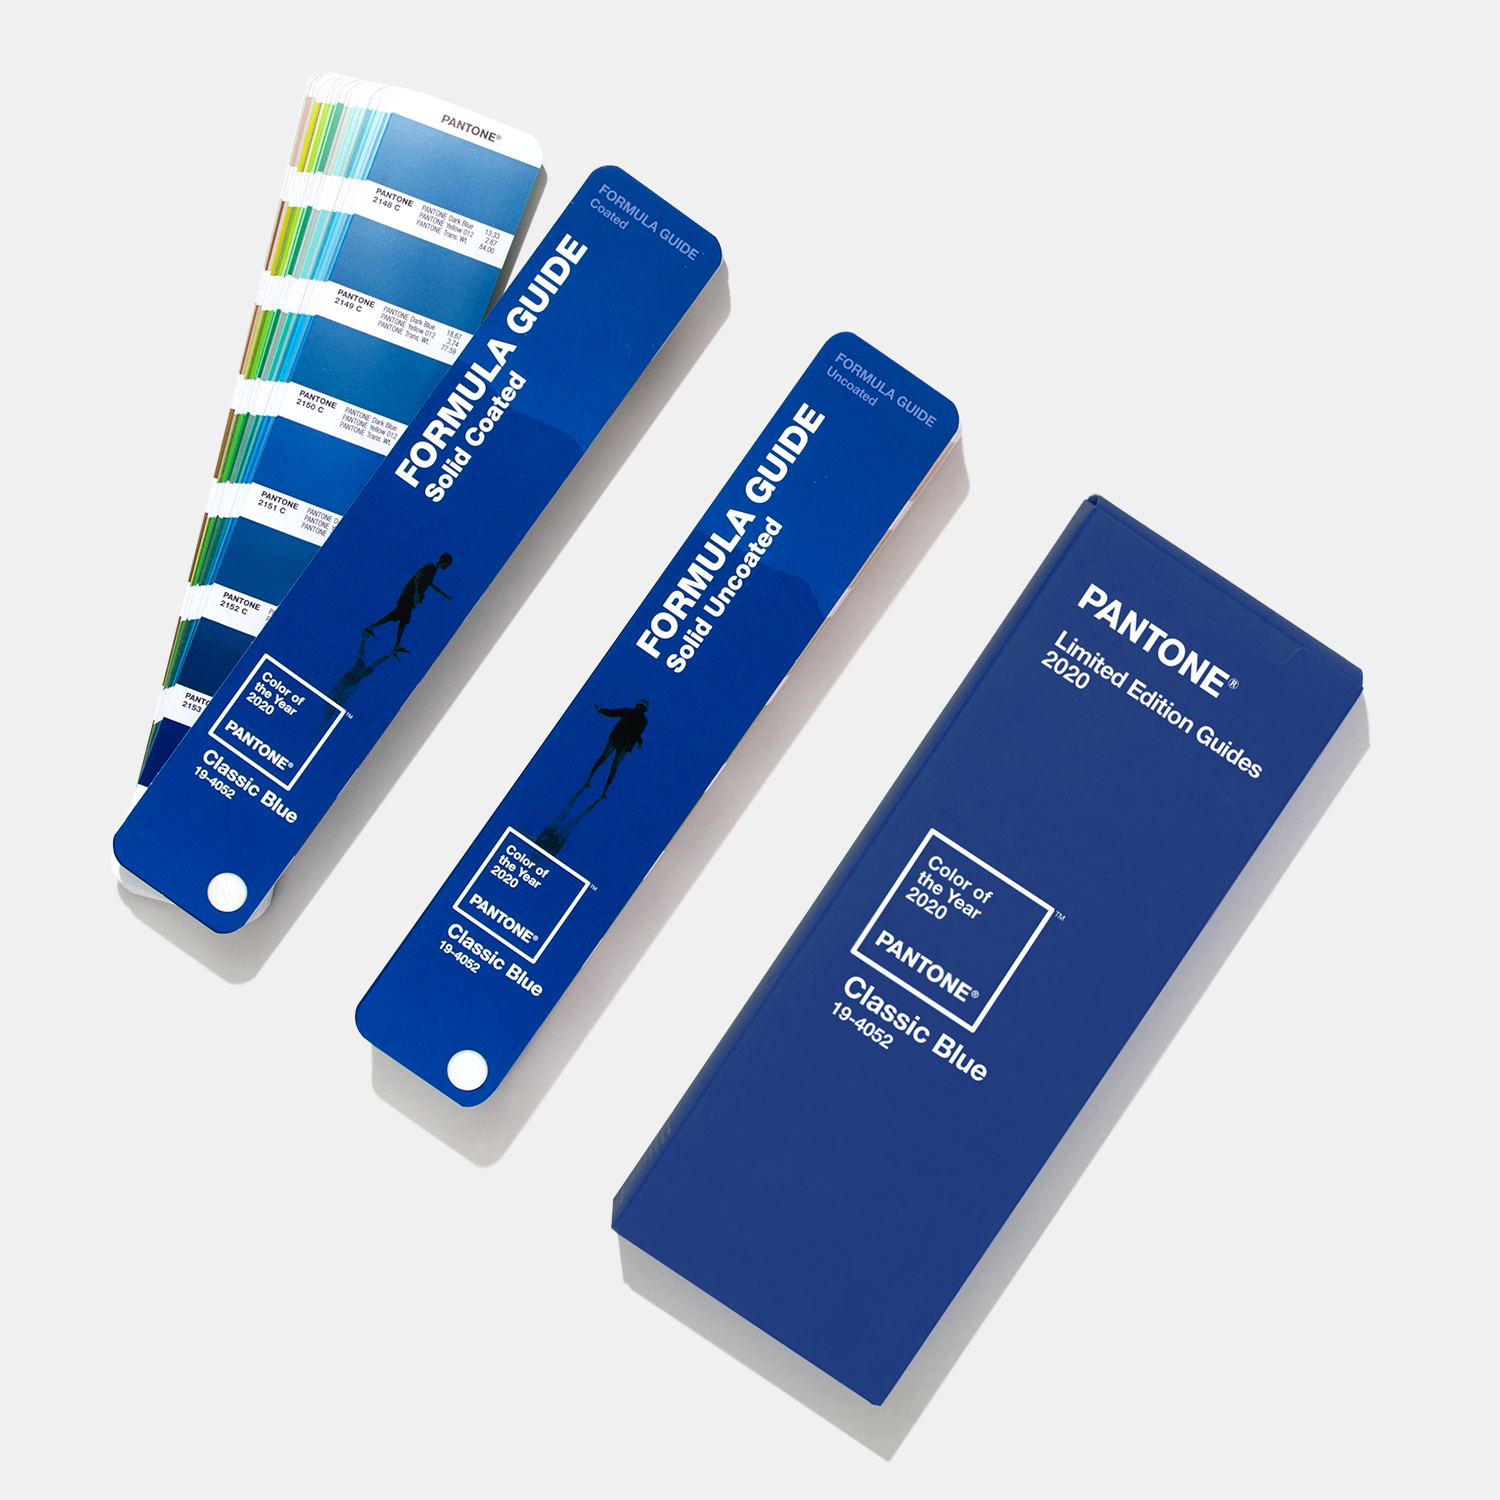 COY-pantone-pms-limited-edition-color-of-the-year-2020-formula-guide-coated-uncoated-2.jpg